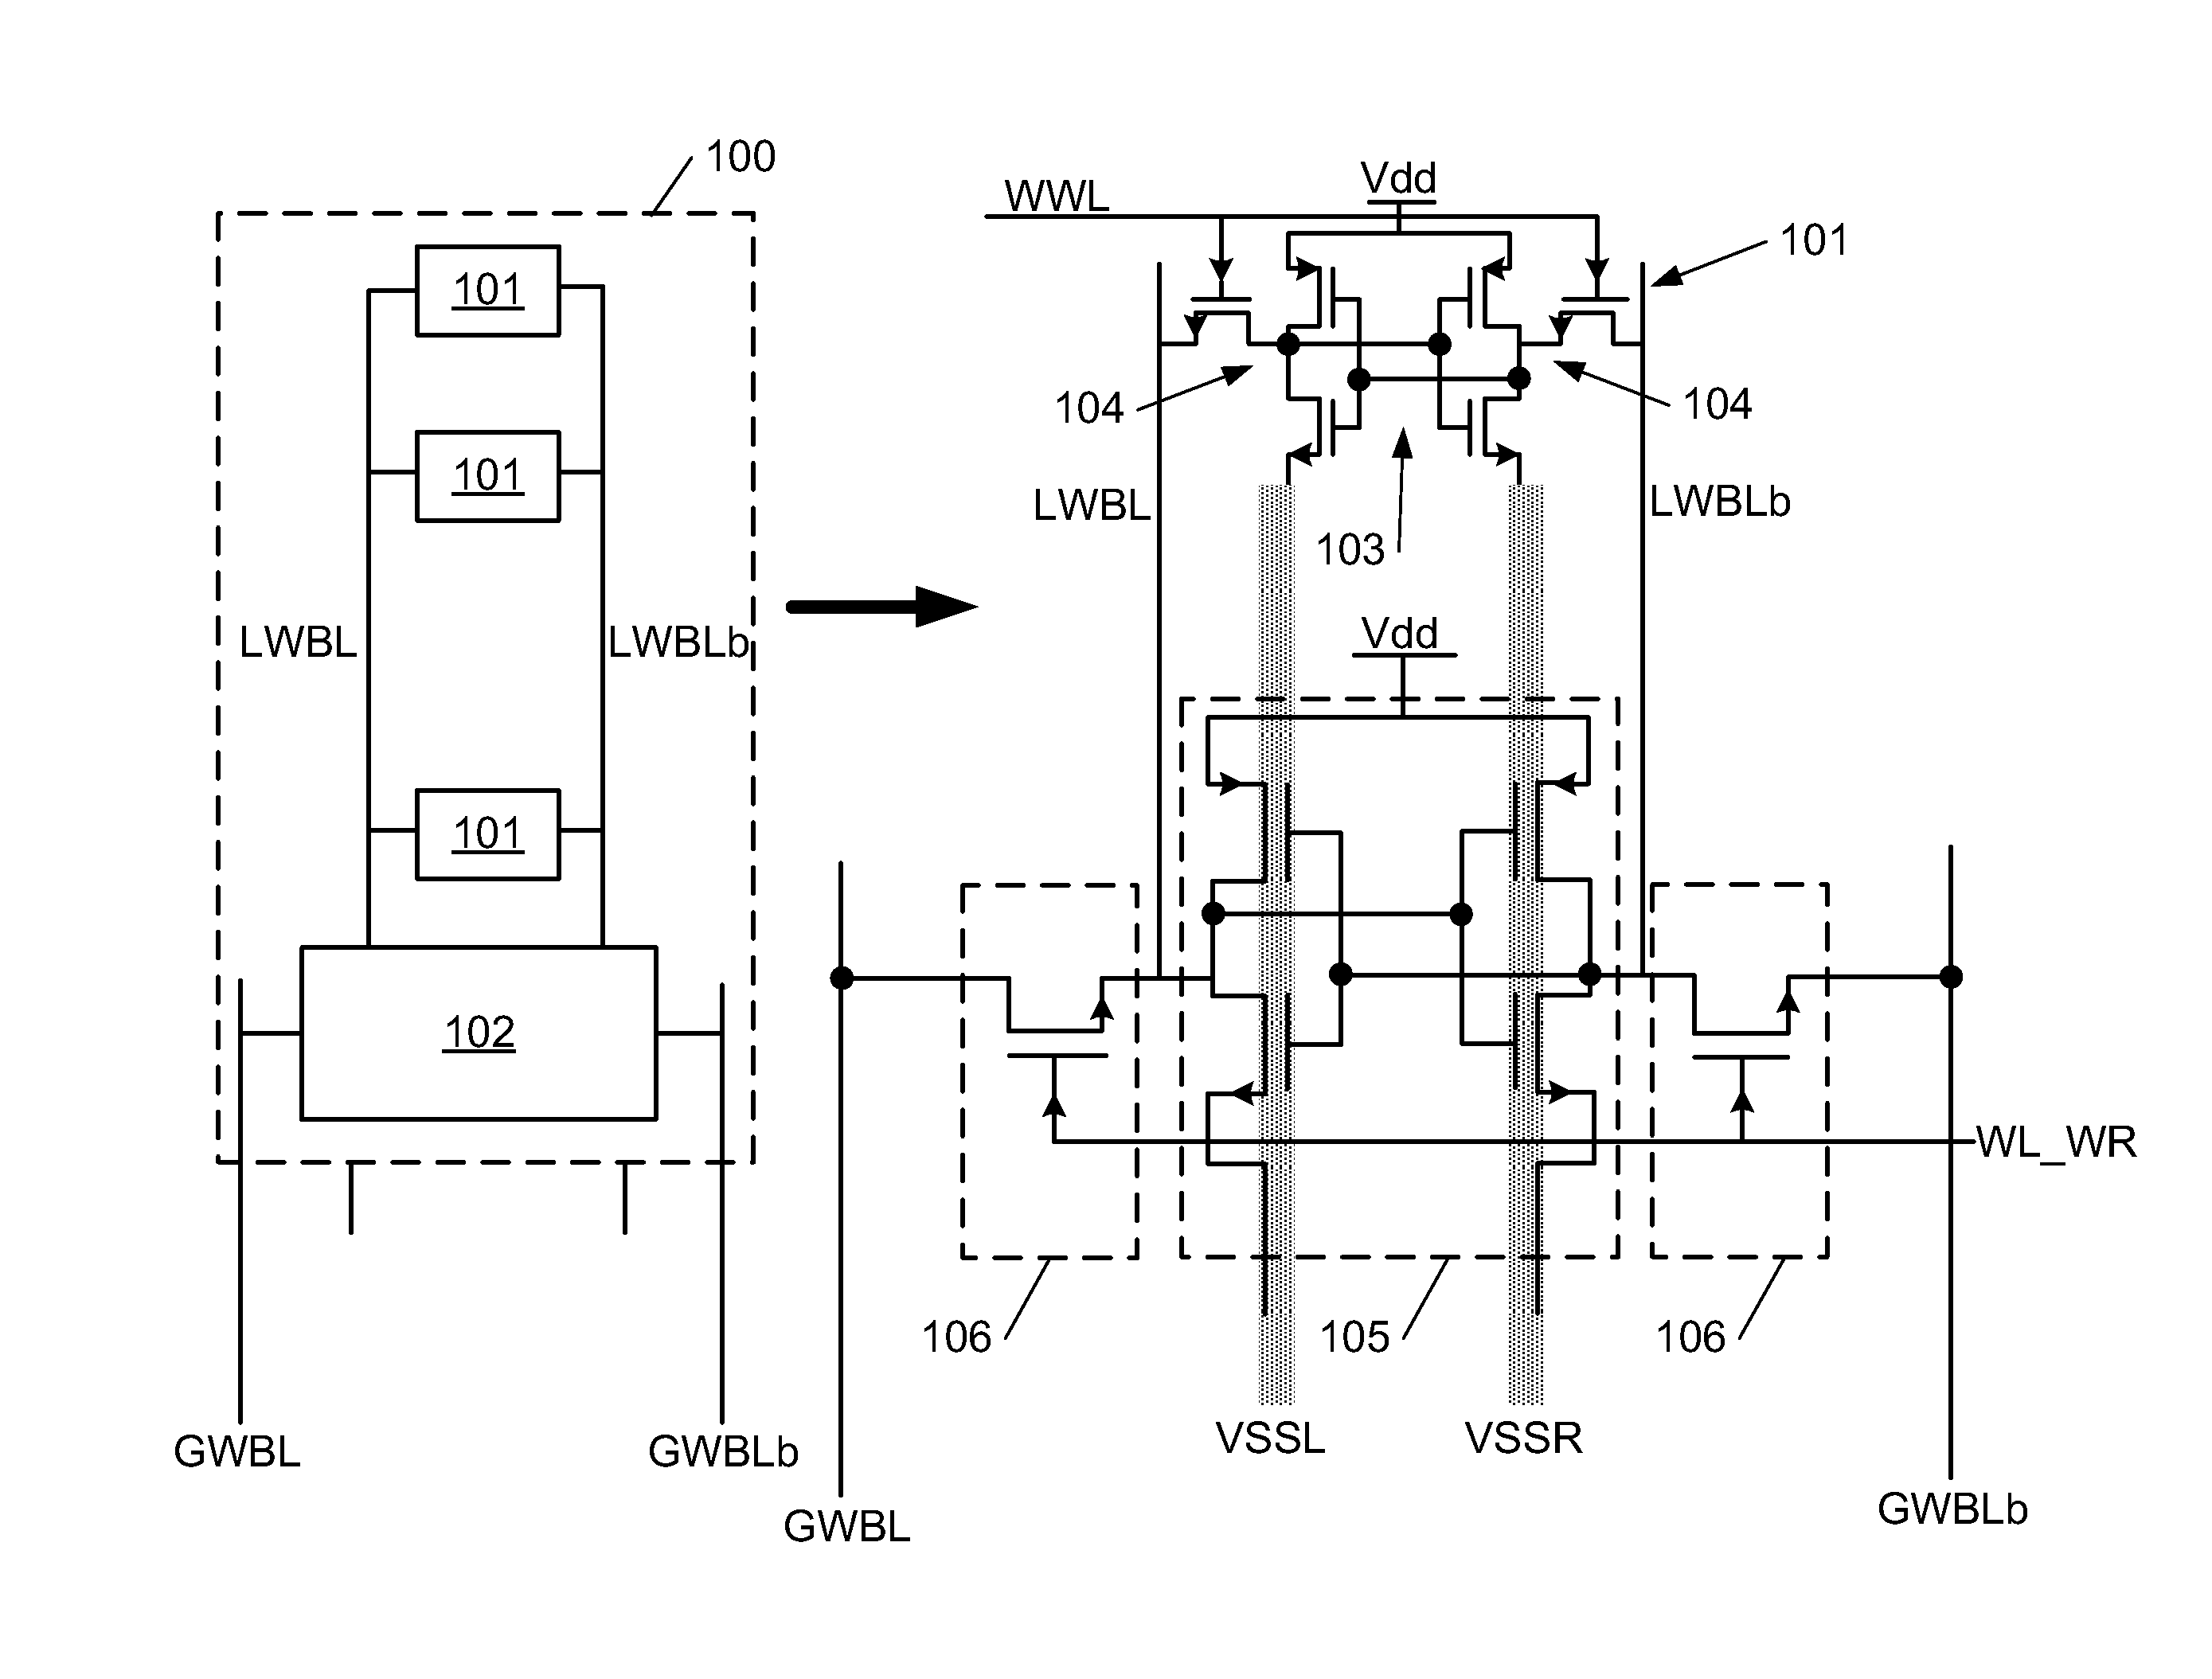 Local write and read assist circuitry for memory device